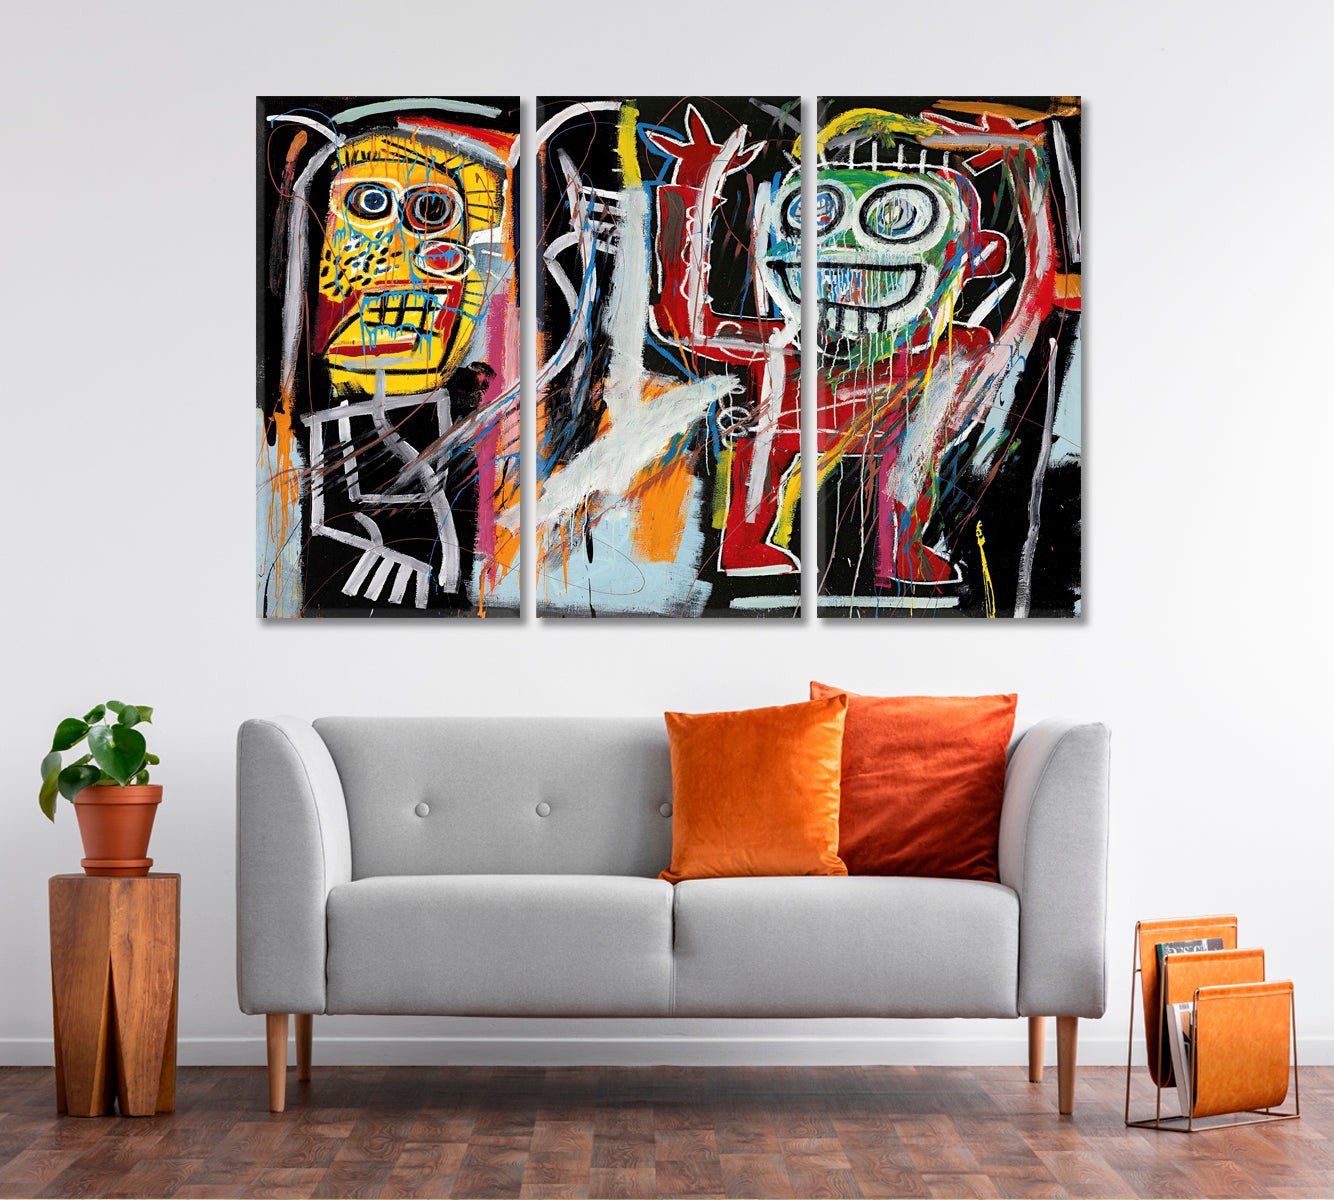 Basquiat Inspired Poster Abstract Art Print Artesty 3 panels 36" x 24" 